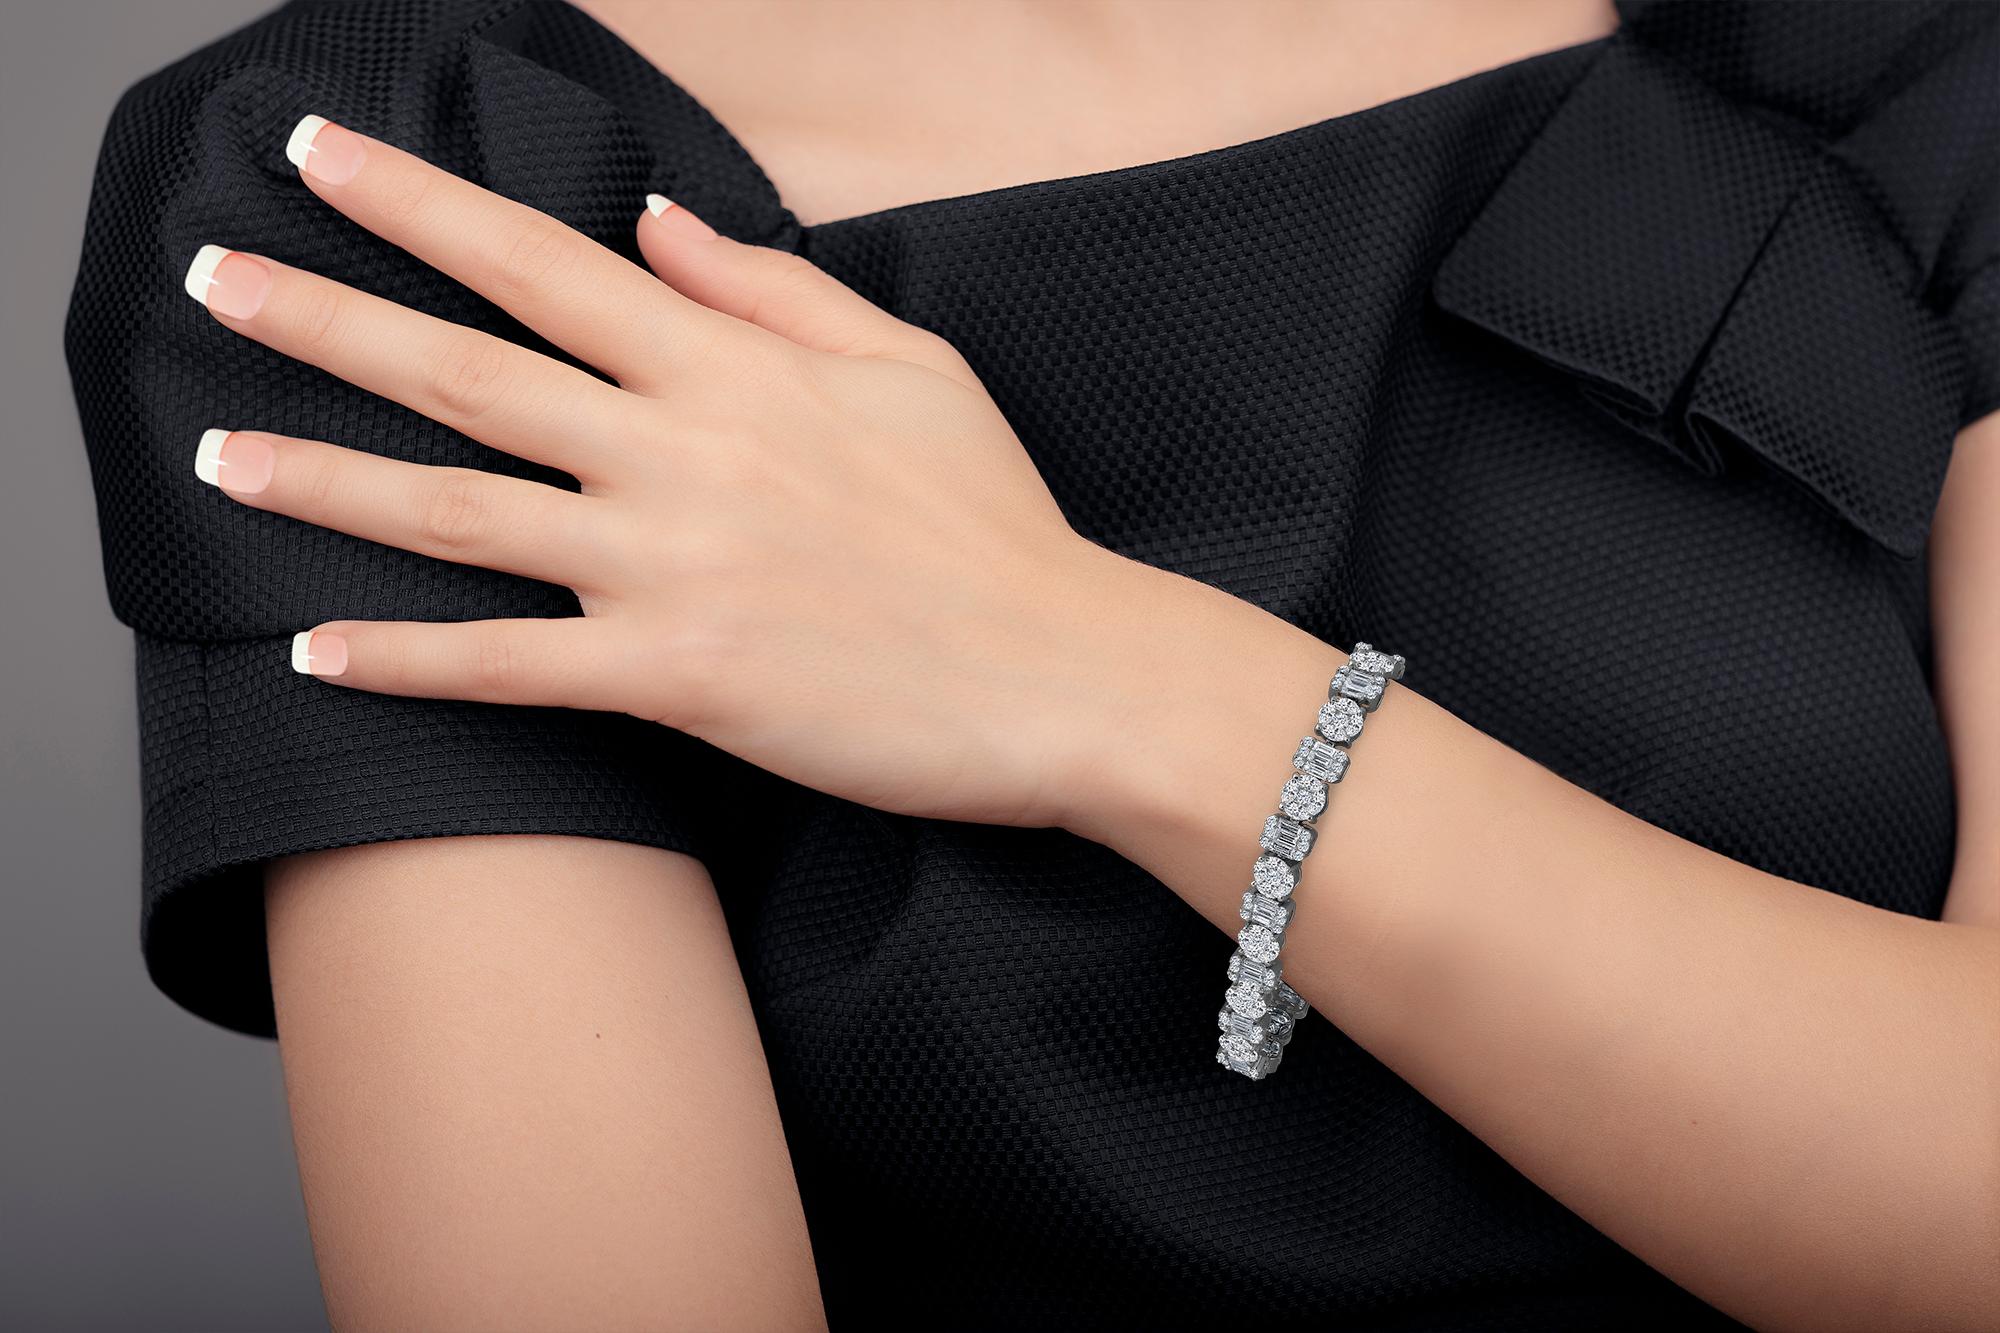 This striking diamond bracelet gives the impression of a much larger piece! 
Color: E-F
Clarity: Vs2 
Metal: !8kw
Length: 7 inches can be shorter or long by request 
For your piece of mind we are a proud Top Selling dealer on 1stdibs with 5 Star